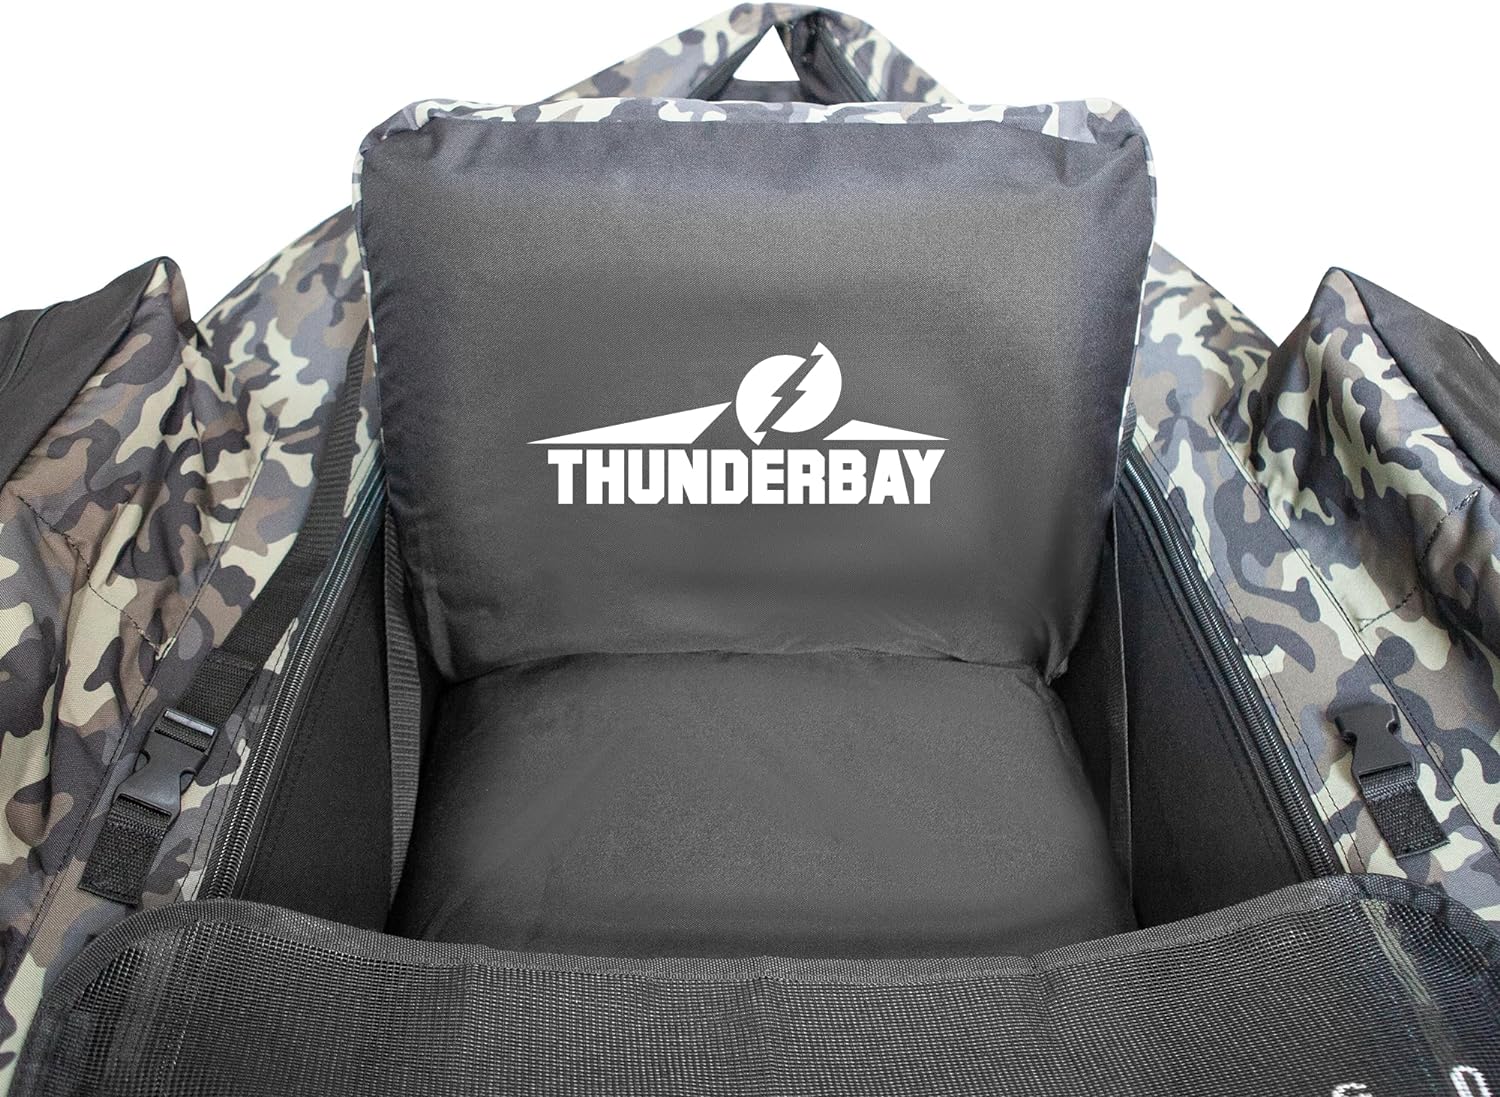 ThunderBay Inflatable Float Tube, Fishing Float Tube with Paddle, Flippers, Fish Ruler, Pump, Storage Pockets, Adjustable Backpack Straps, 350LBS Load Bearing Capacity Belly Boat - ThunderBay Inflatable Float Tube Review